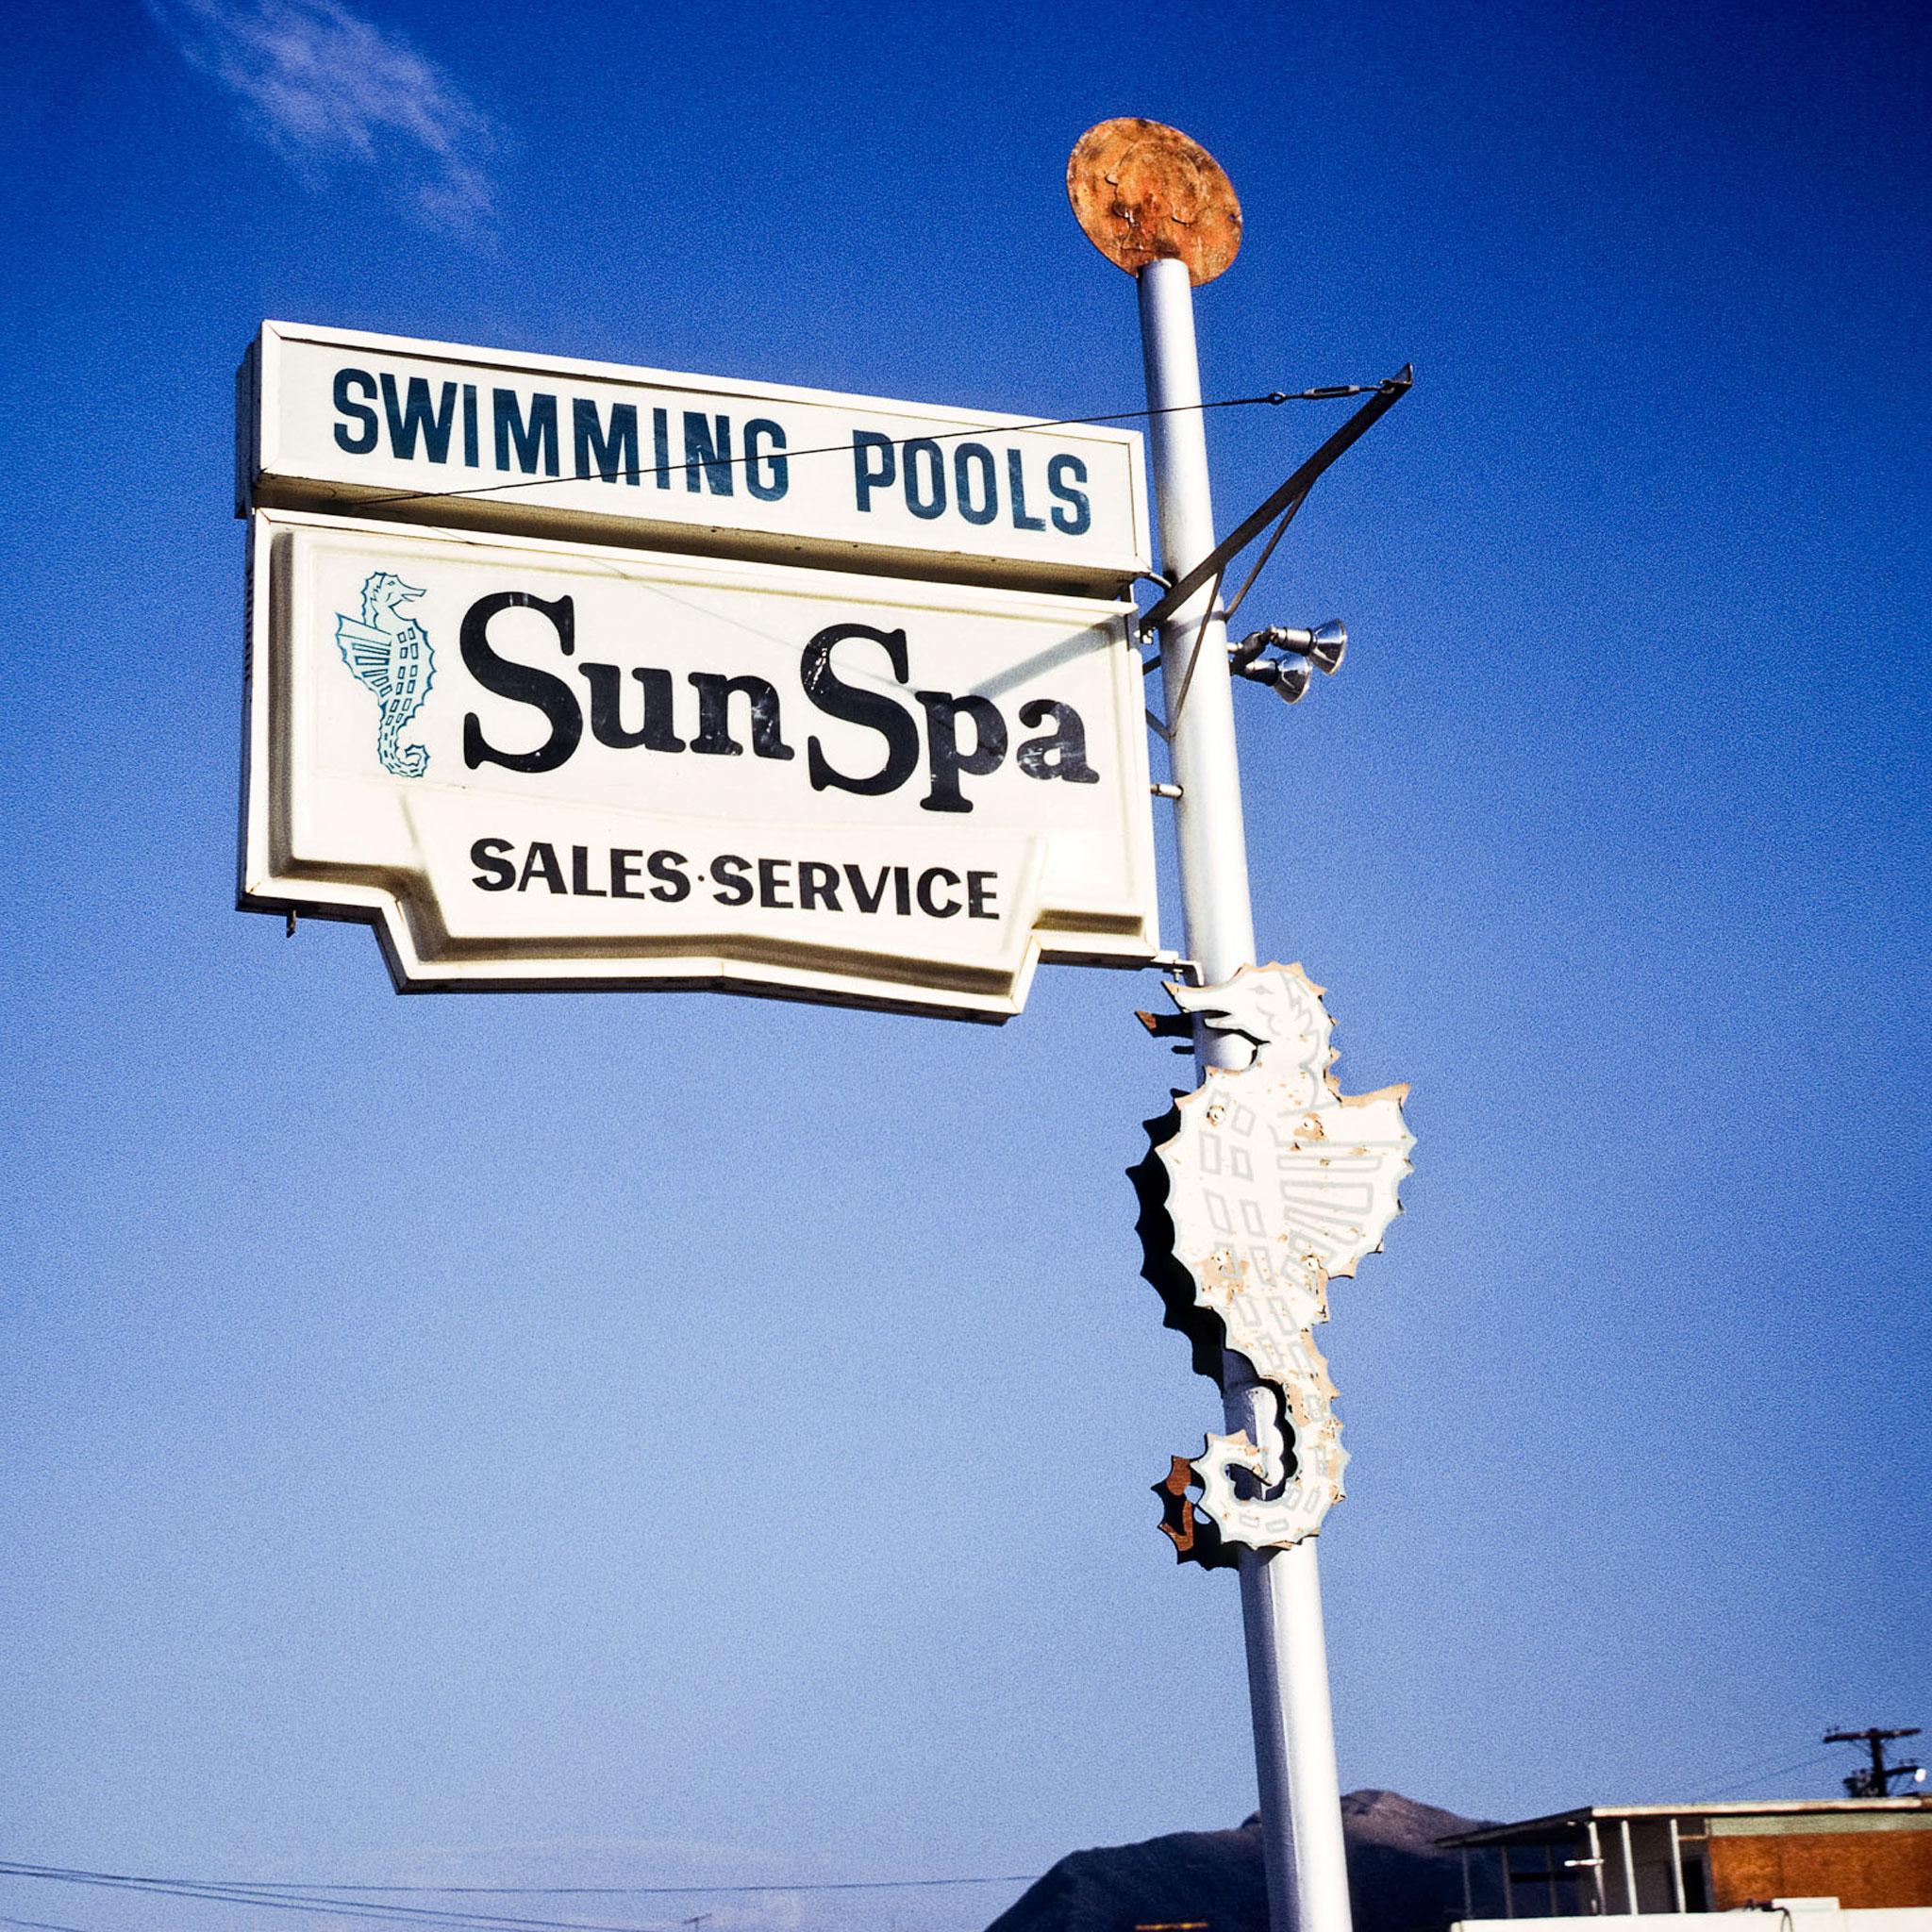 A sign that says "SunSpa, Sales Servies" and "Swimming Pools" against a blue sky